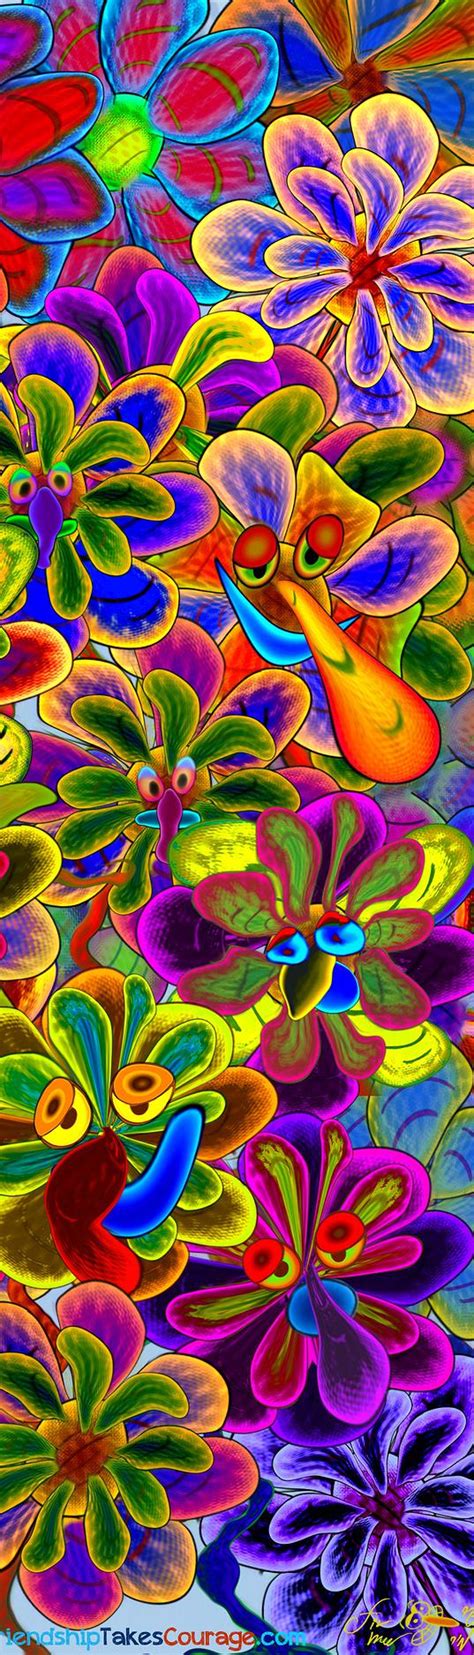 Psychedelic Pictures Smiling Flowers Drawings From The Second Story Of